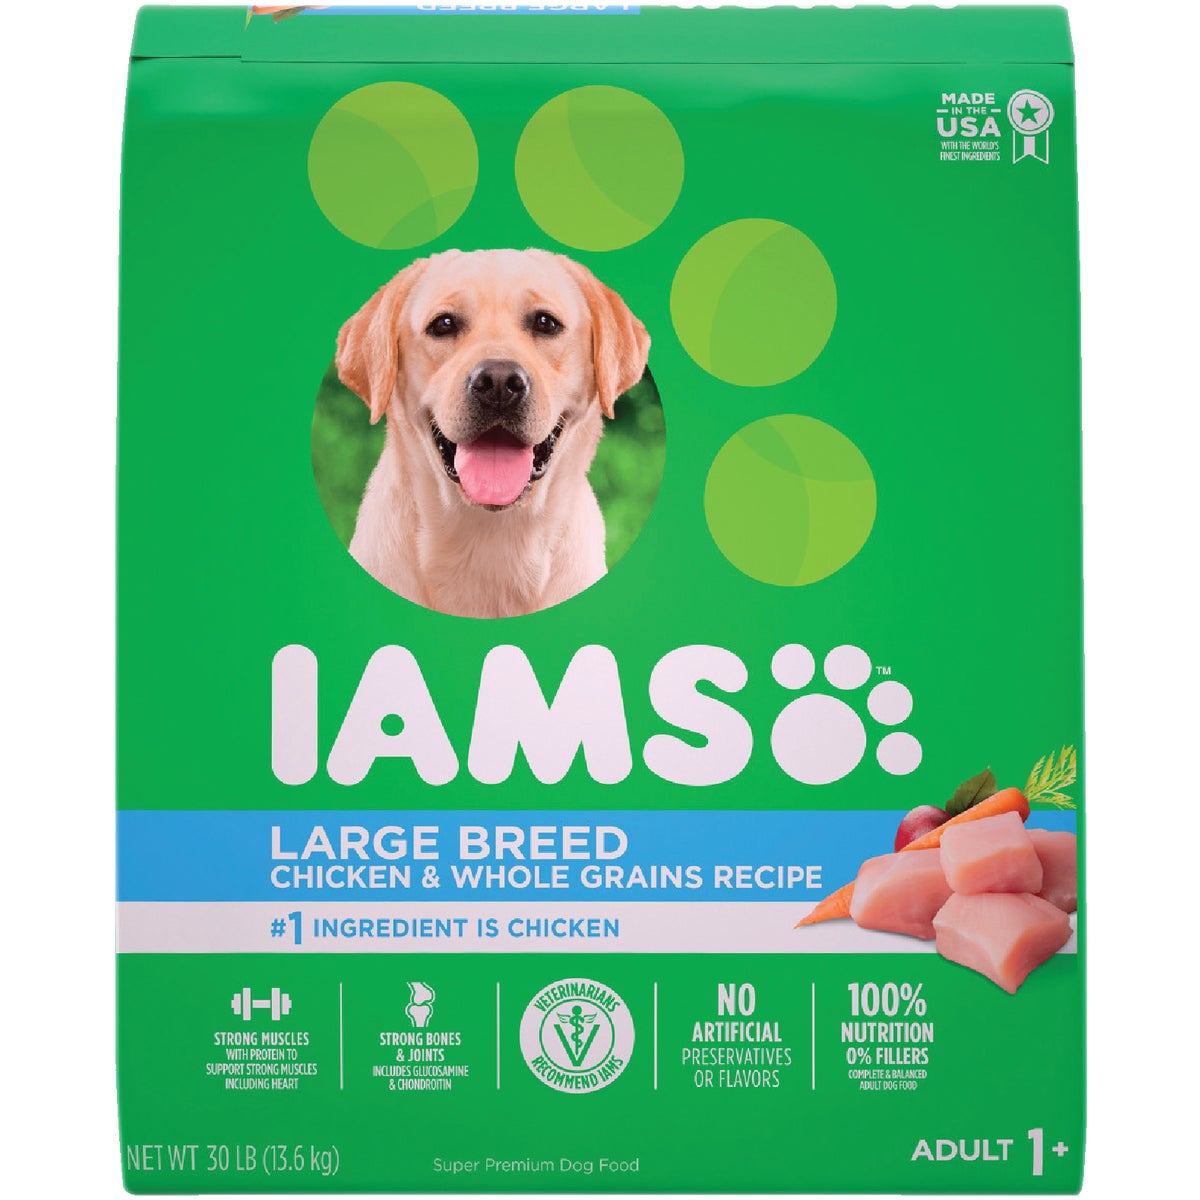 Item 800159, Designed for dogs ages 1 year and older and up to 50 lb.